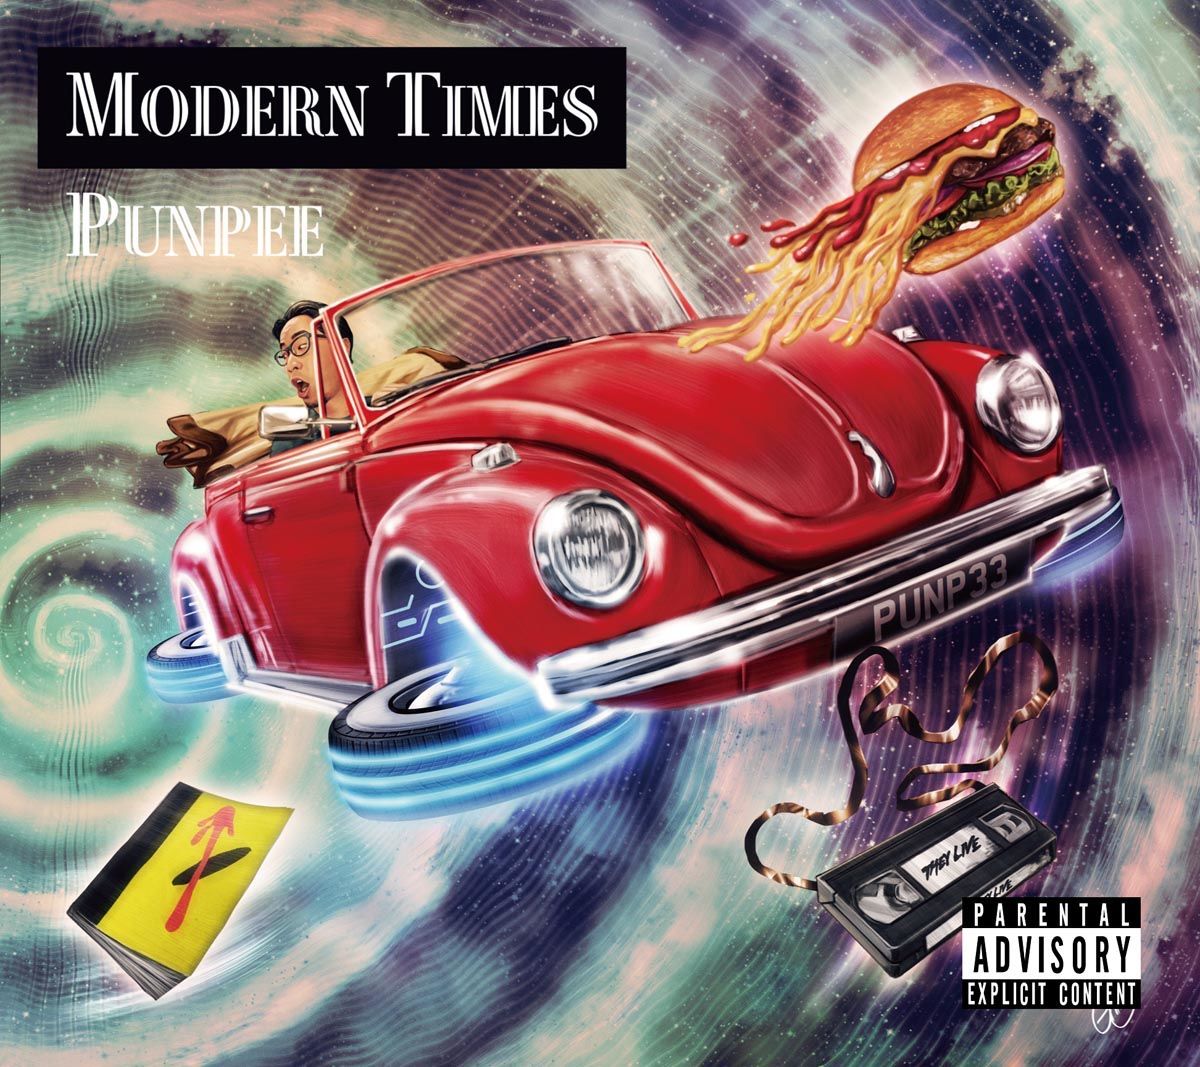 PUNPEEが『MODERN TIMES』を解説する『MODERN TIMES -Commentary-』の 